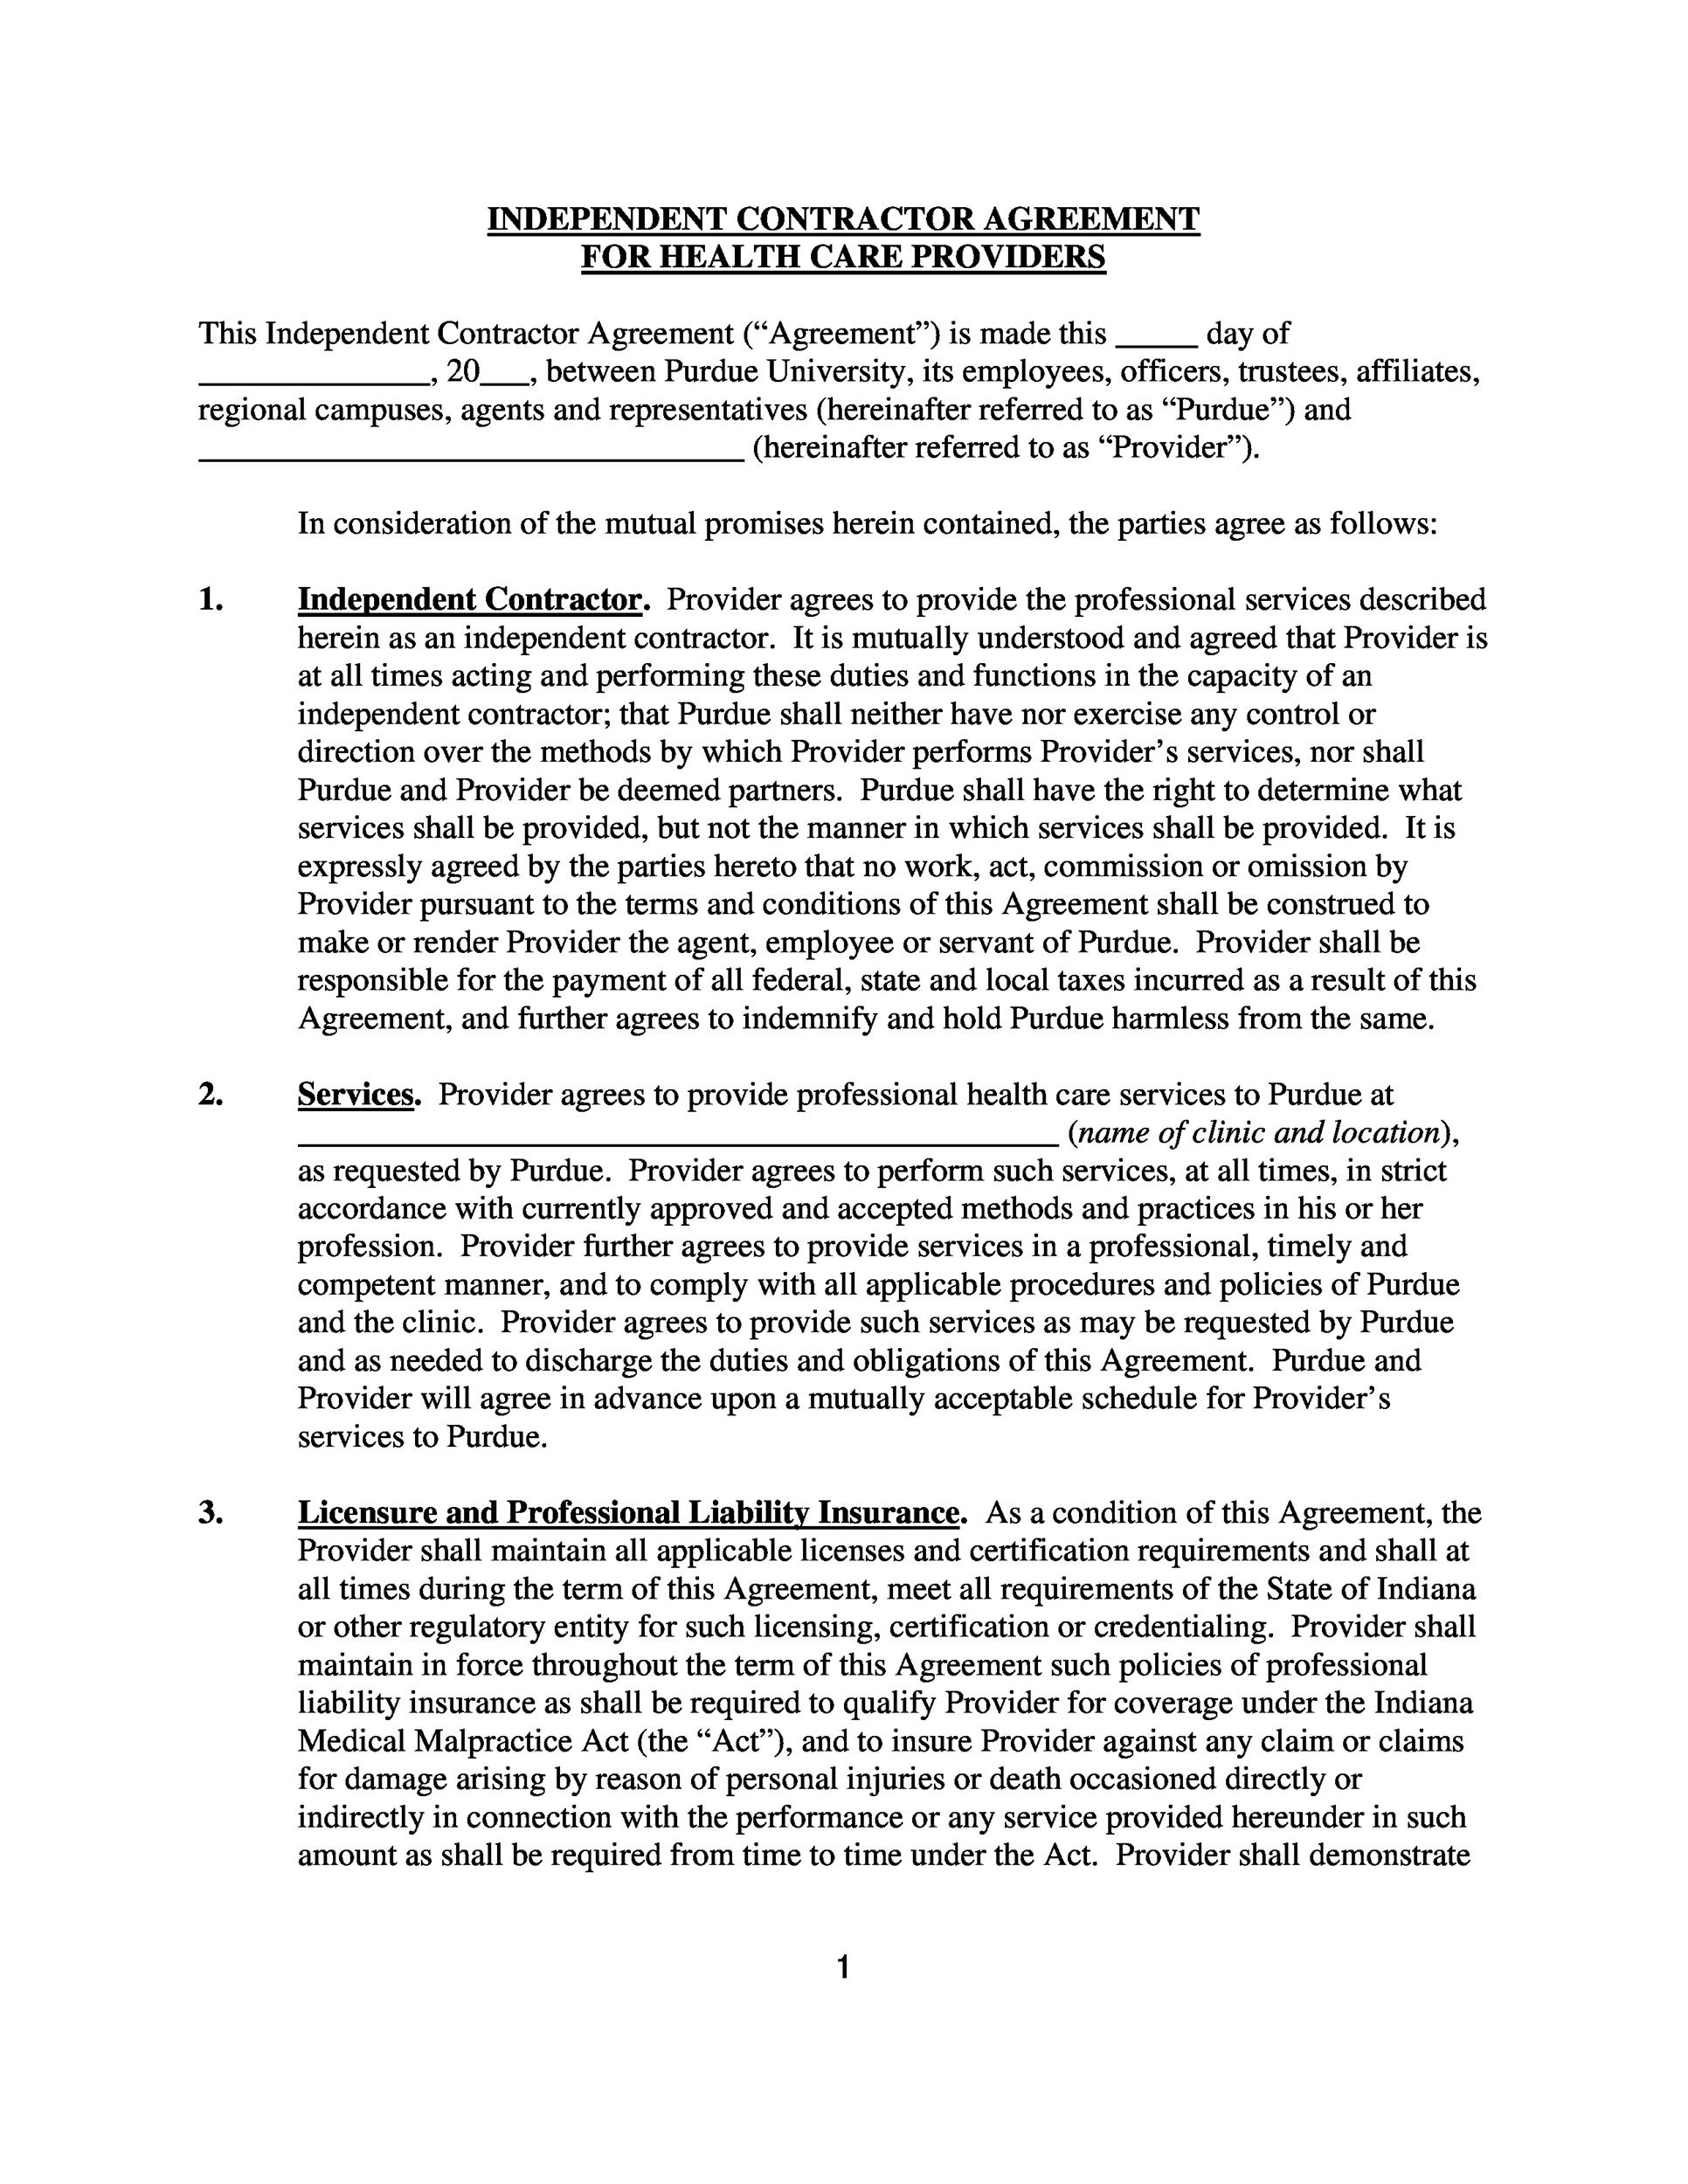 Free independent contractor agreement 05